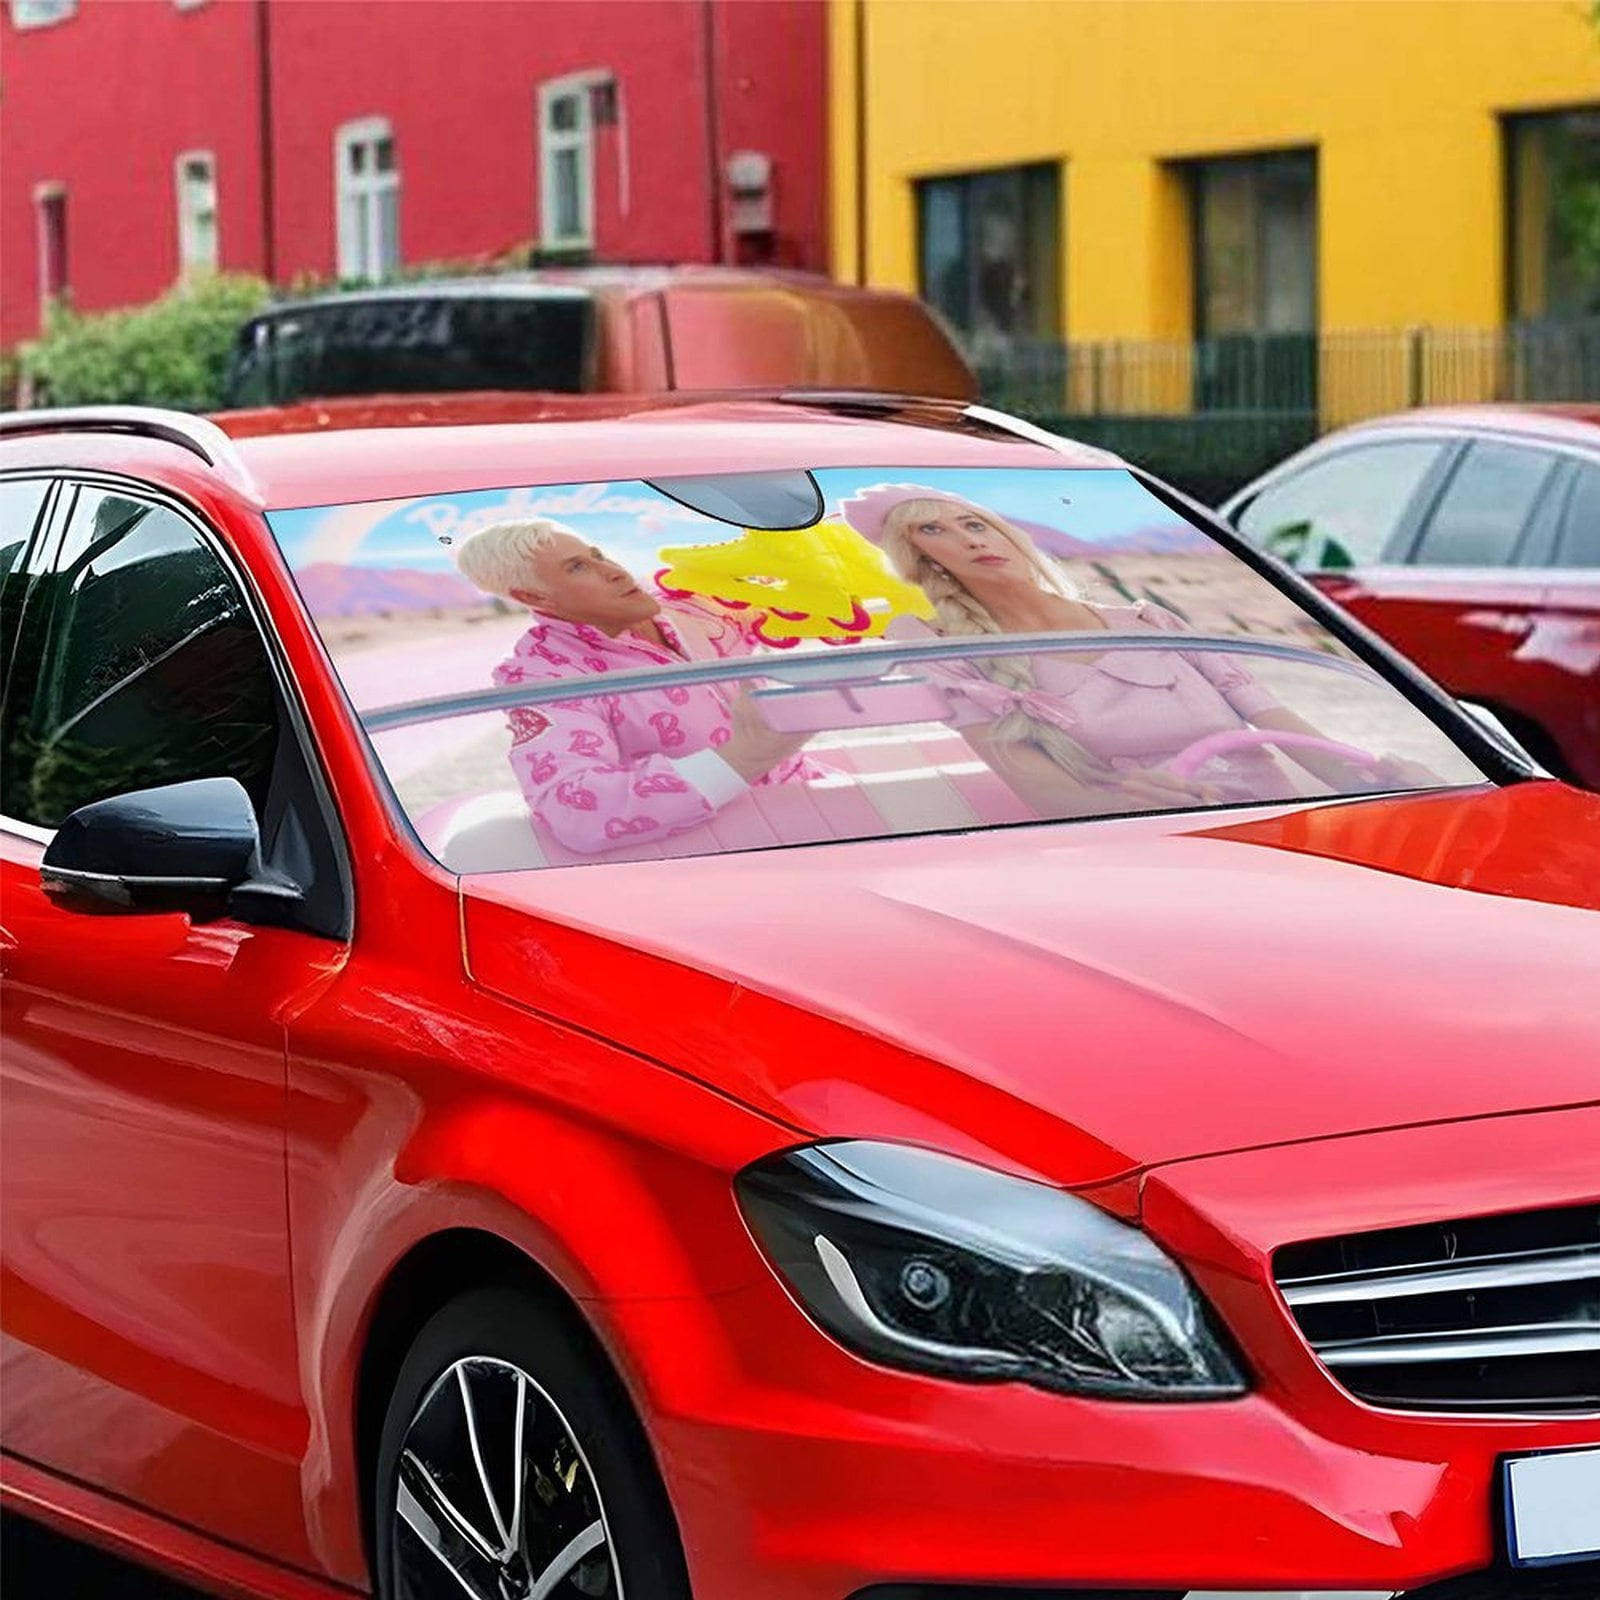 Real Movie Characters Privacy Car Sunshade